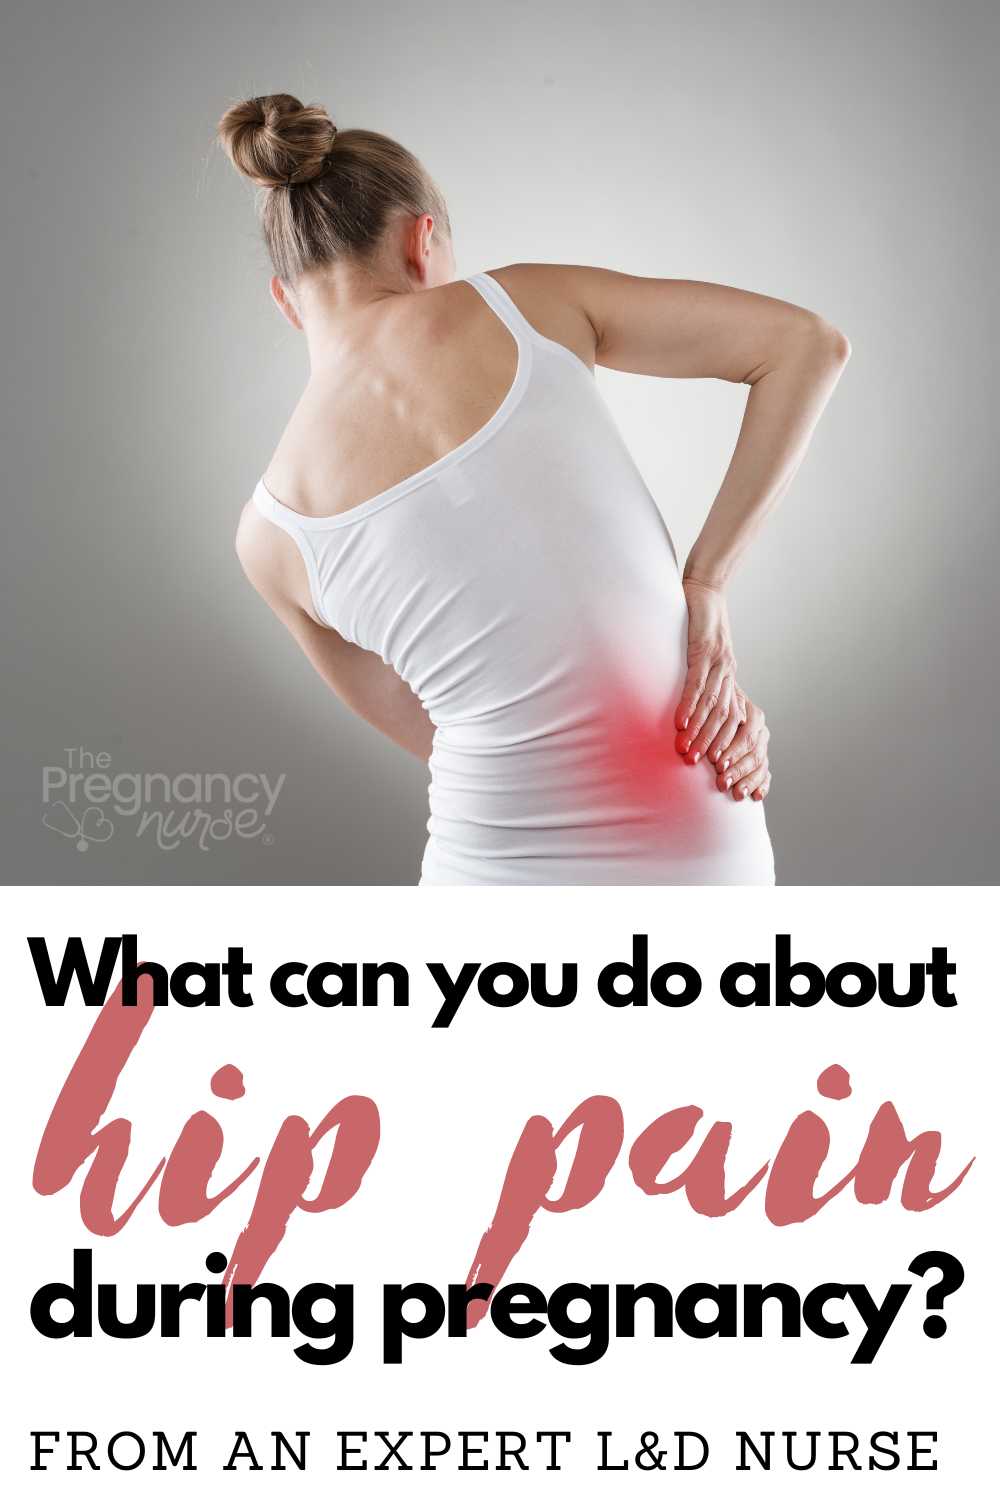 Tired of aching hip pain during pregnancy? Let me help! As an experienced nurse and mother, I've walked the same path and found relief. Explore my pin for practical tips and effective exercises to ease your hip pain naturally!